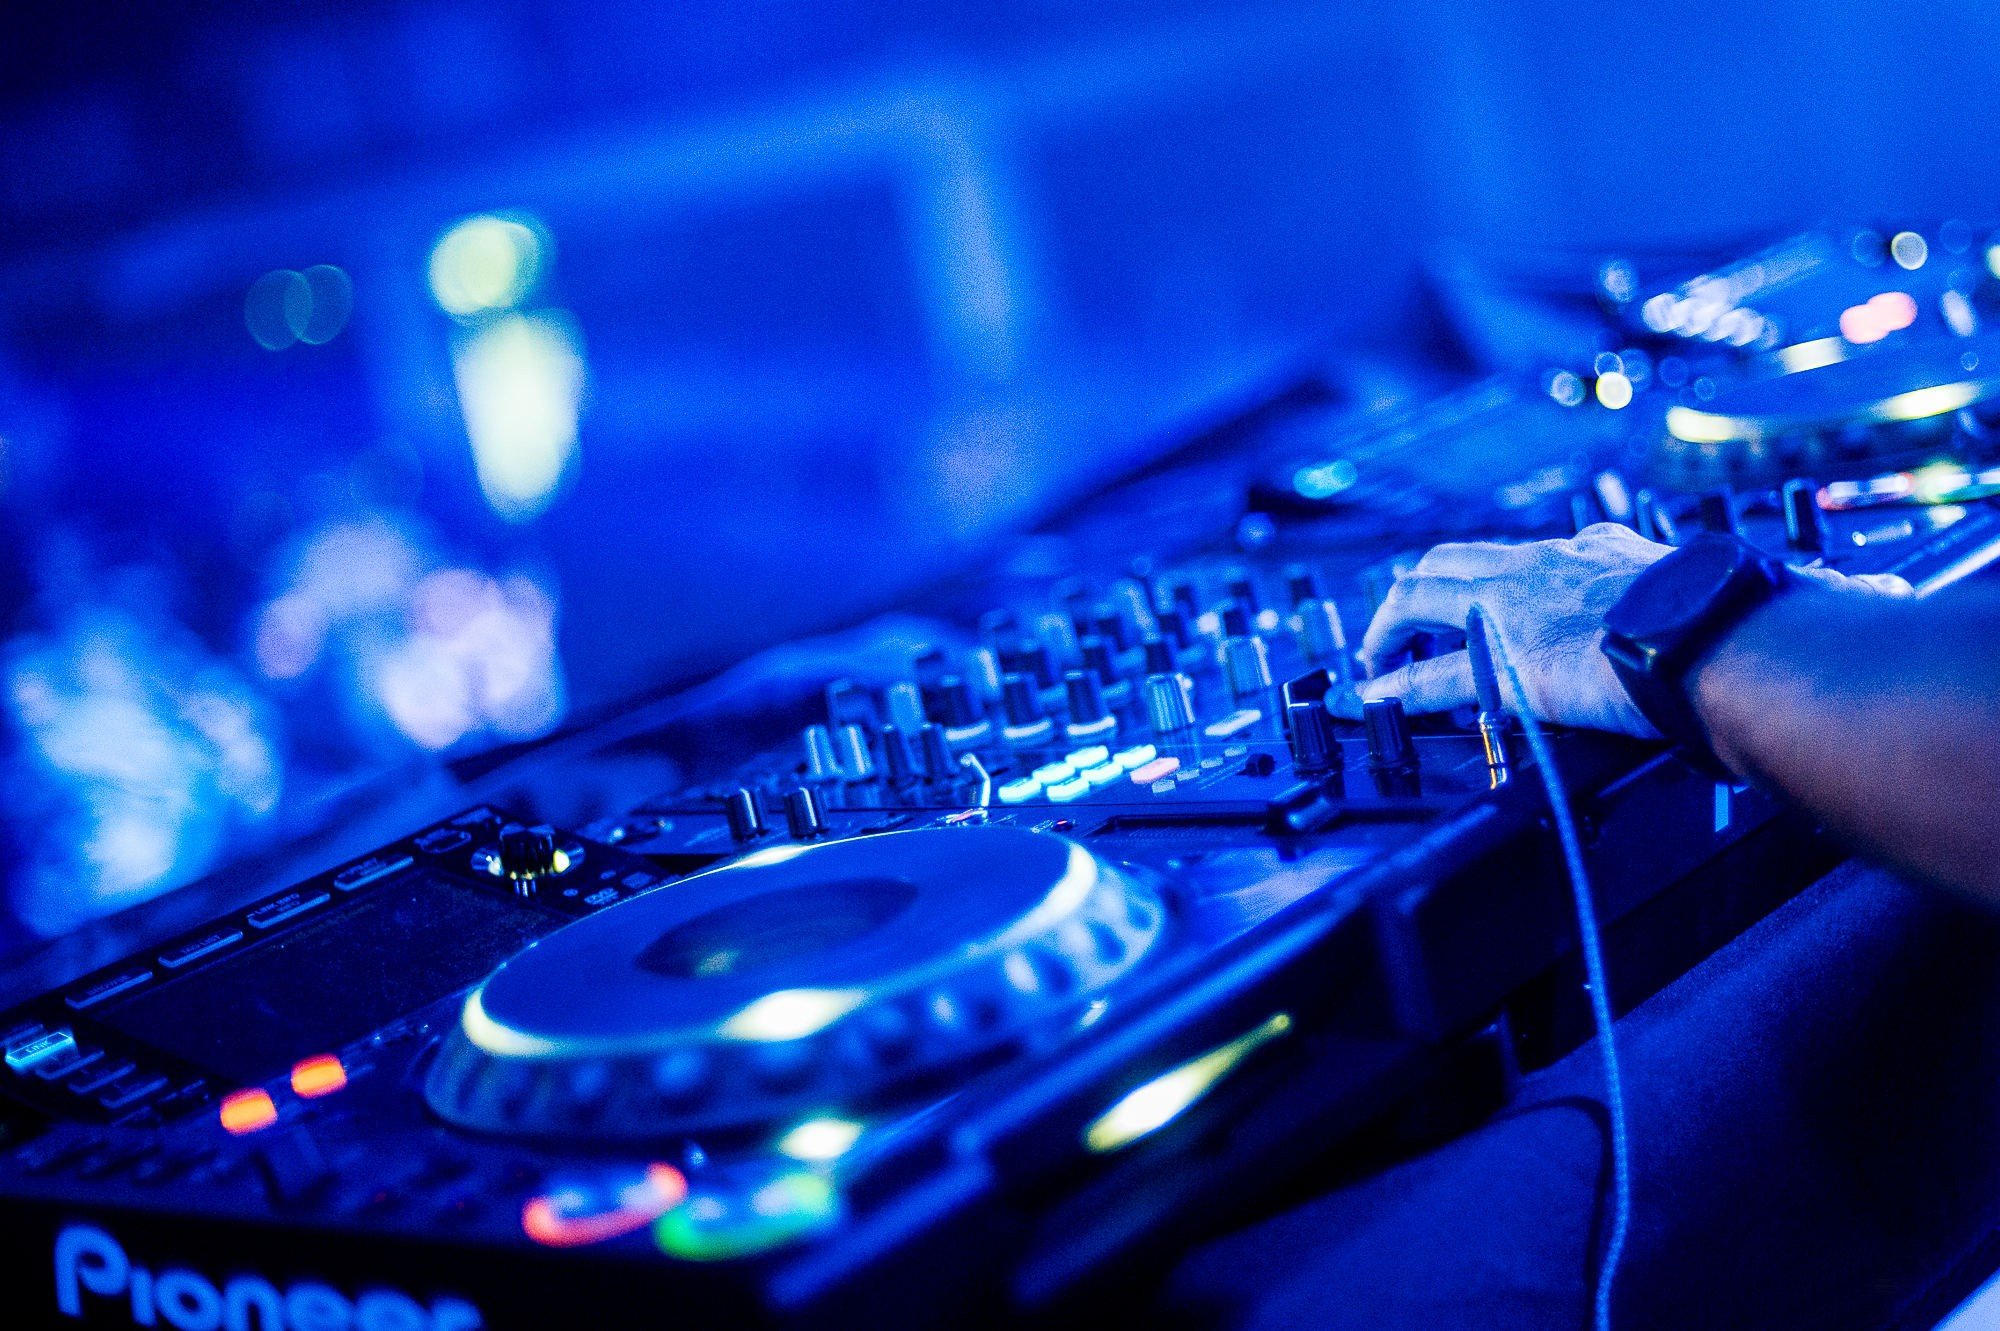 DJ, Turntables, Mixing consoles Wallpaper HD / Desktop and Mobile Background